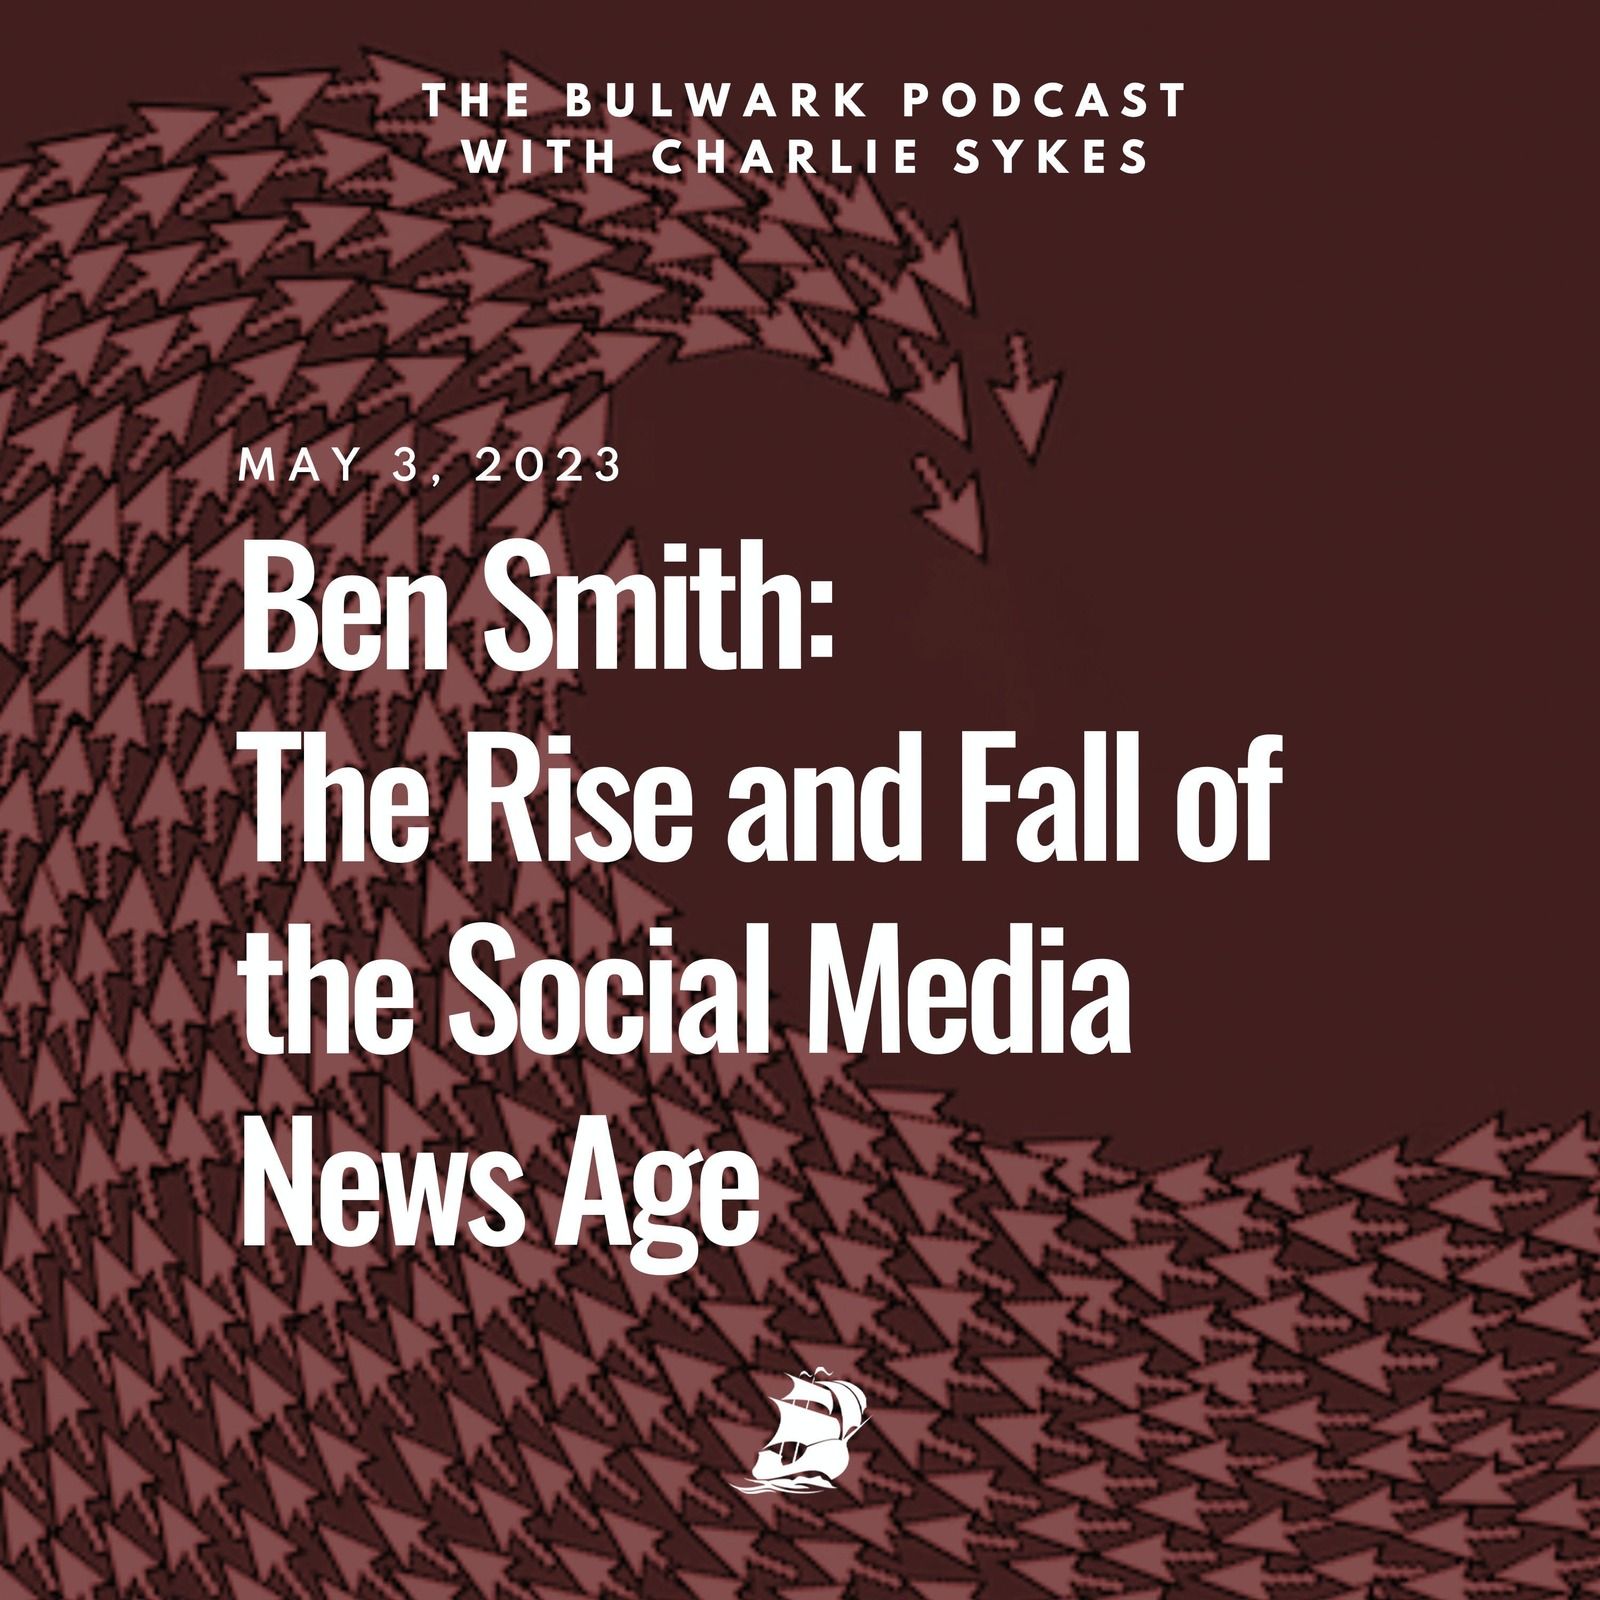 Ben Smith: The Rise and Fall of the Social Media News Age by The Bulwark Podcast